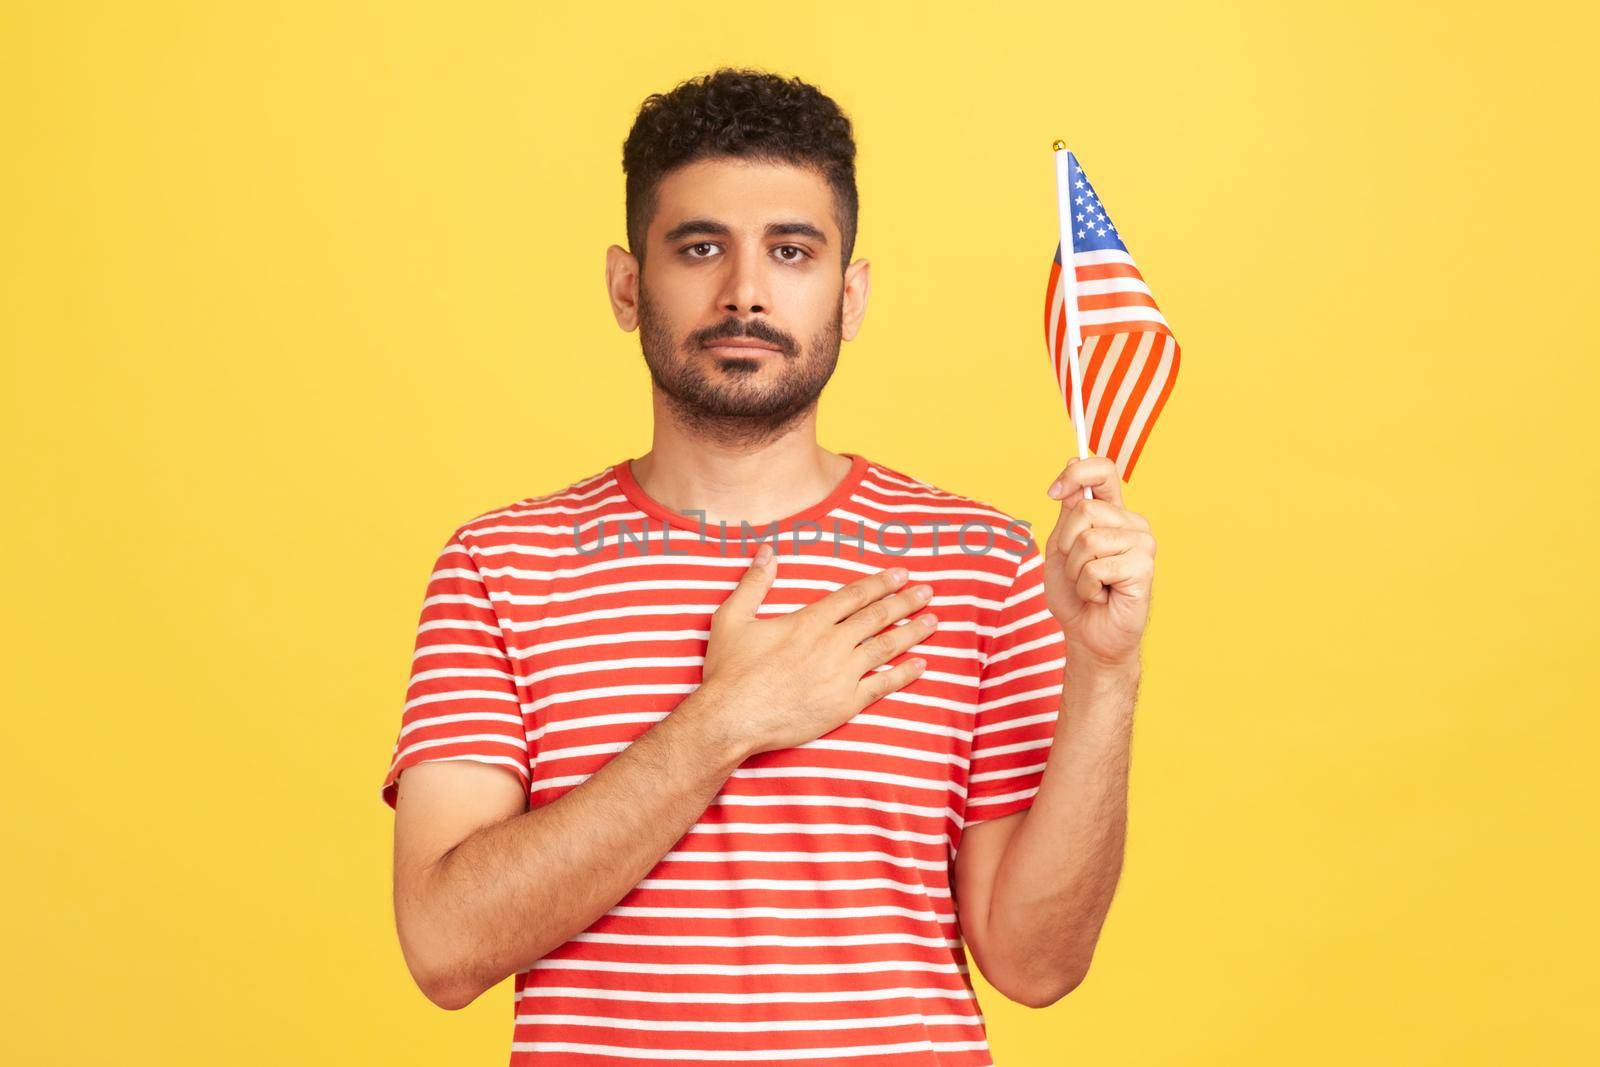 Serious bearded man in striped t-shirt holding united states of america flag holding hand on heart, swearing allegiance, patriotism, independence. Indoor studio shot isolated on yellow background